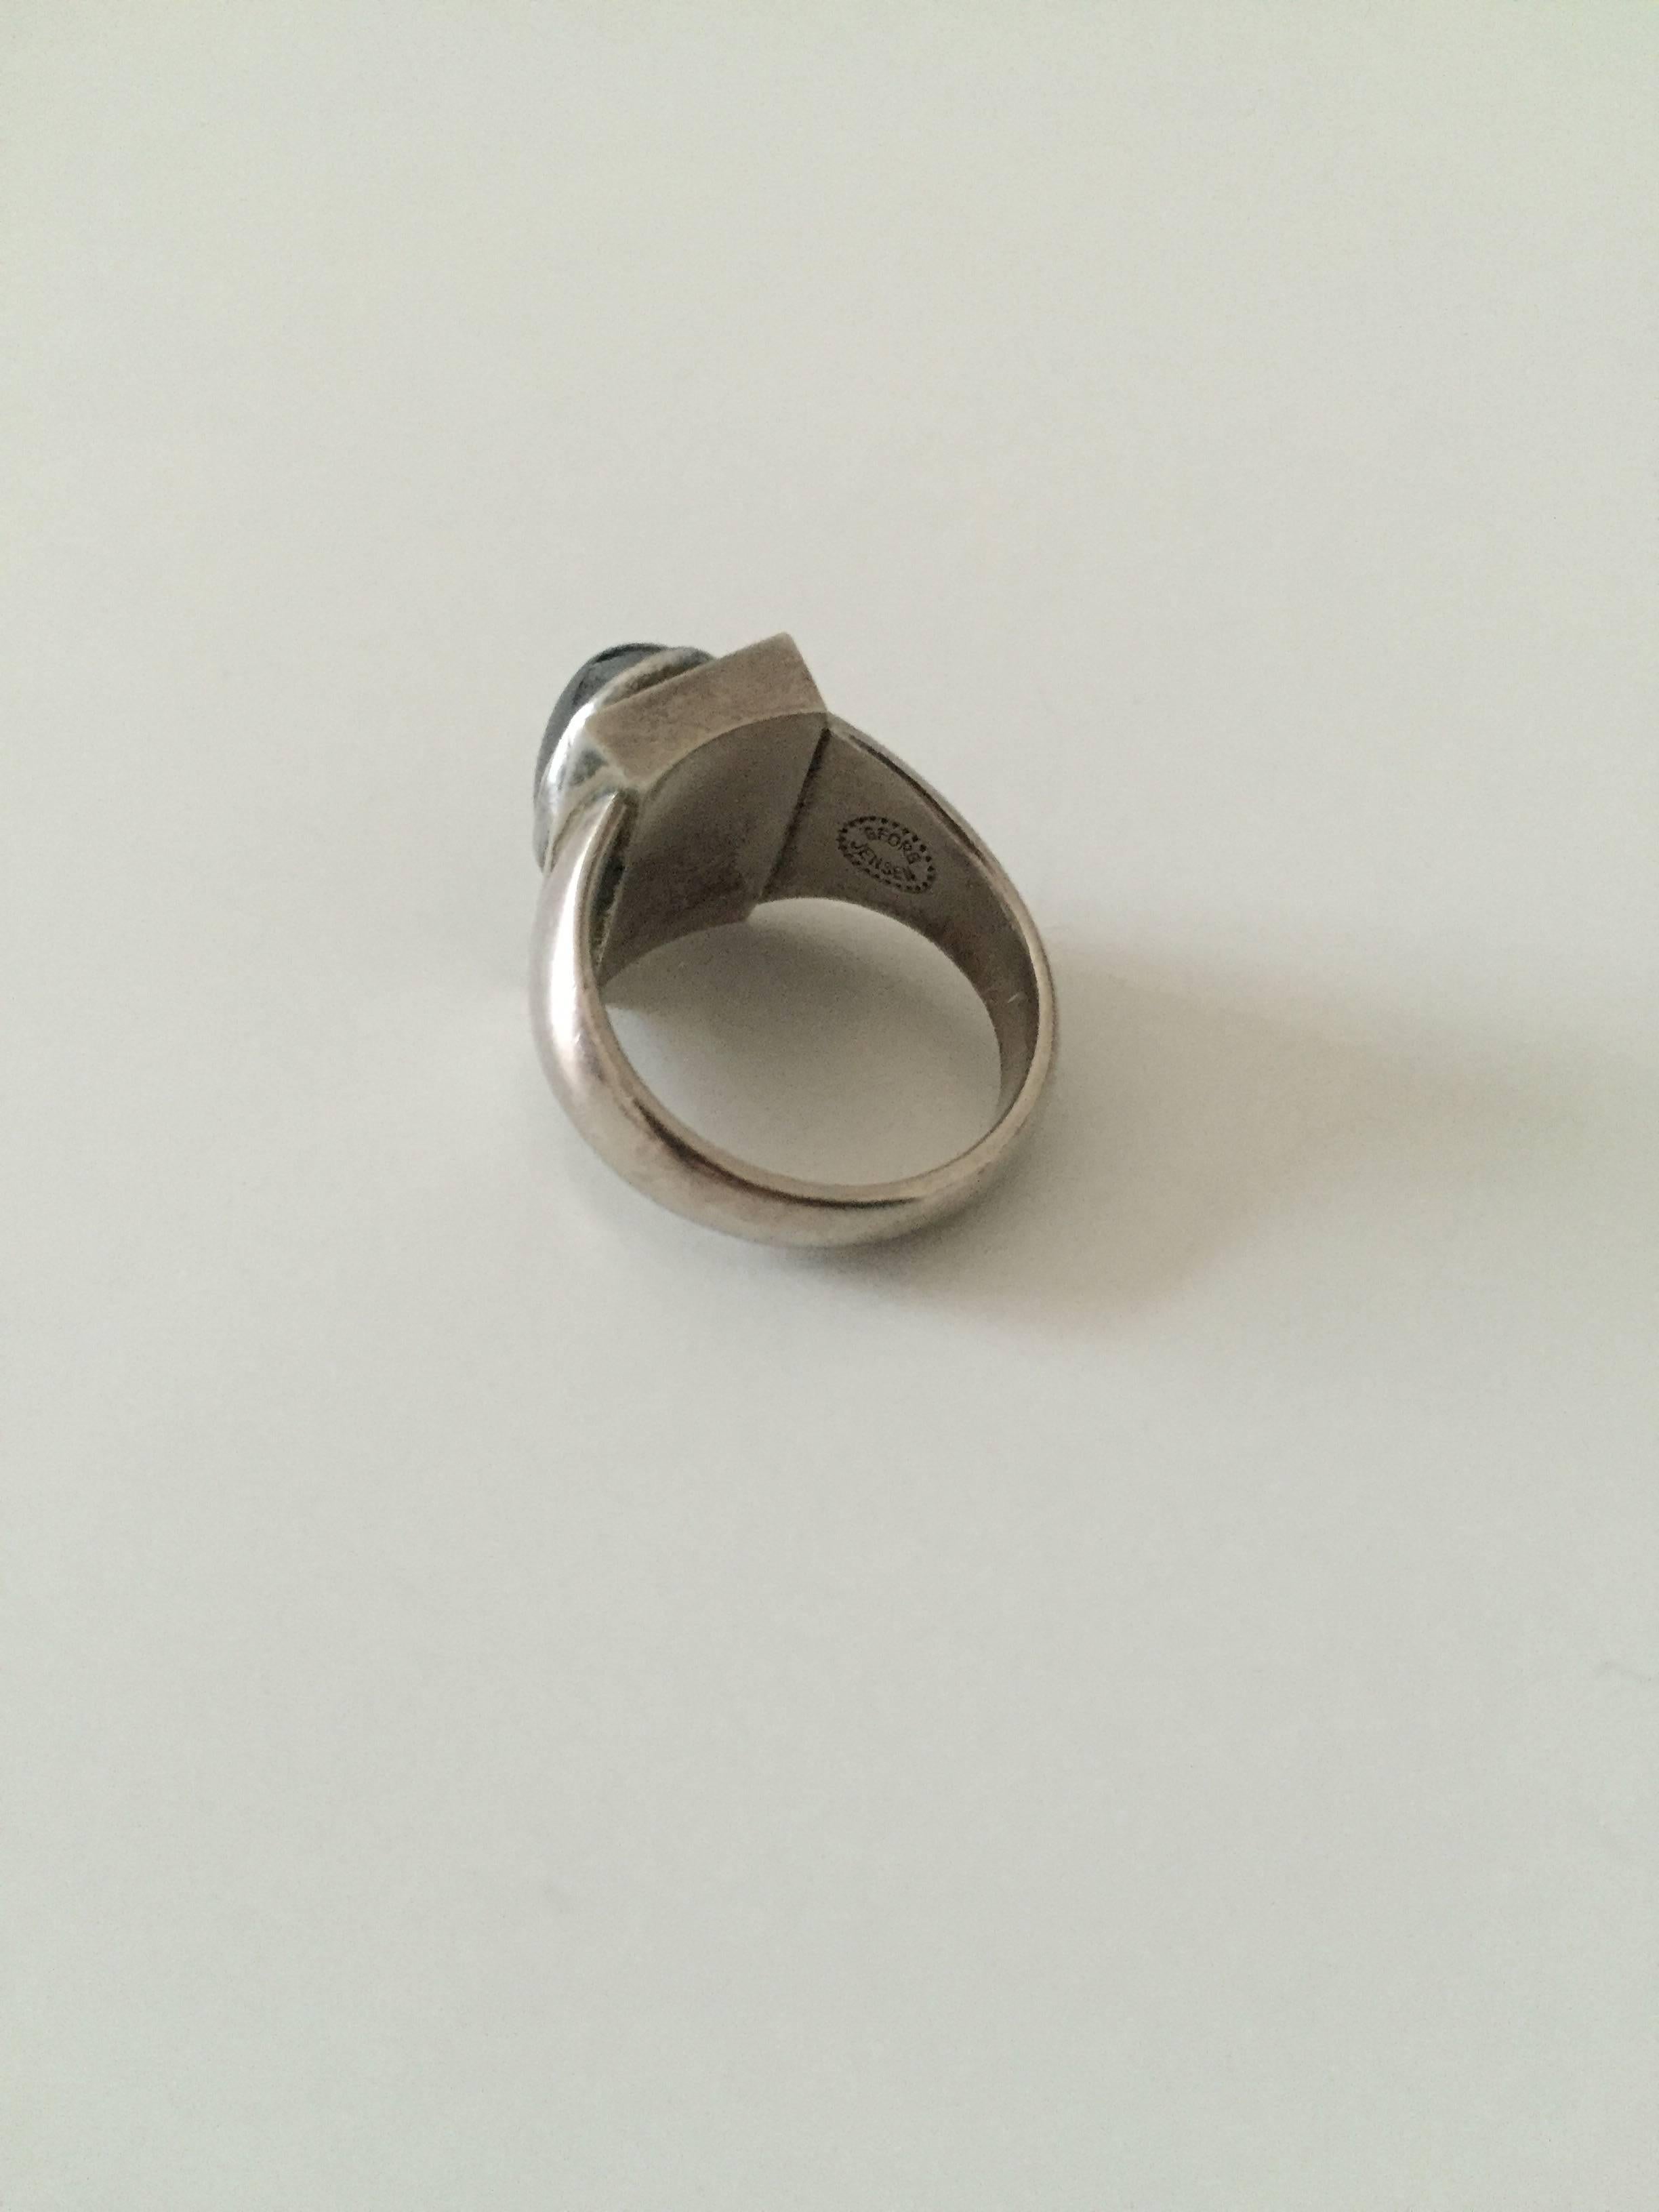 Georg Jensen sterling silver ring with stone #84. 

Size 50. 
Weighs 8.6 g / 0.30 oz

Georg Jensen (1866-1935) opened his small silver atelier in Copenhagen, Denmark in 1904. By 1935 the year of his death, he had received world acclaim and was